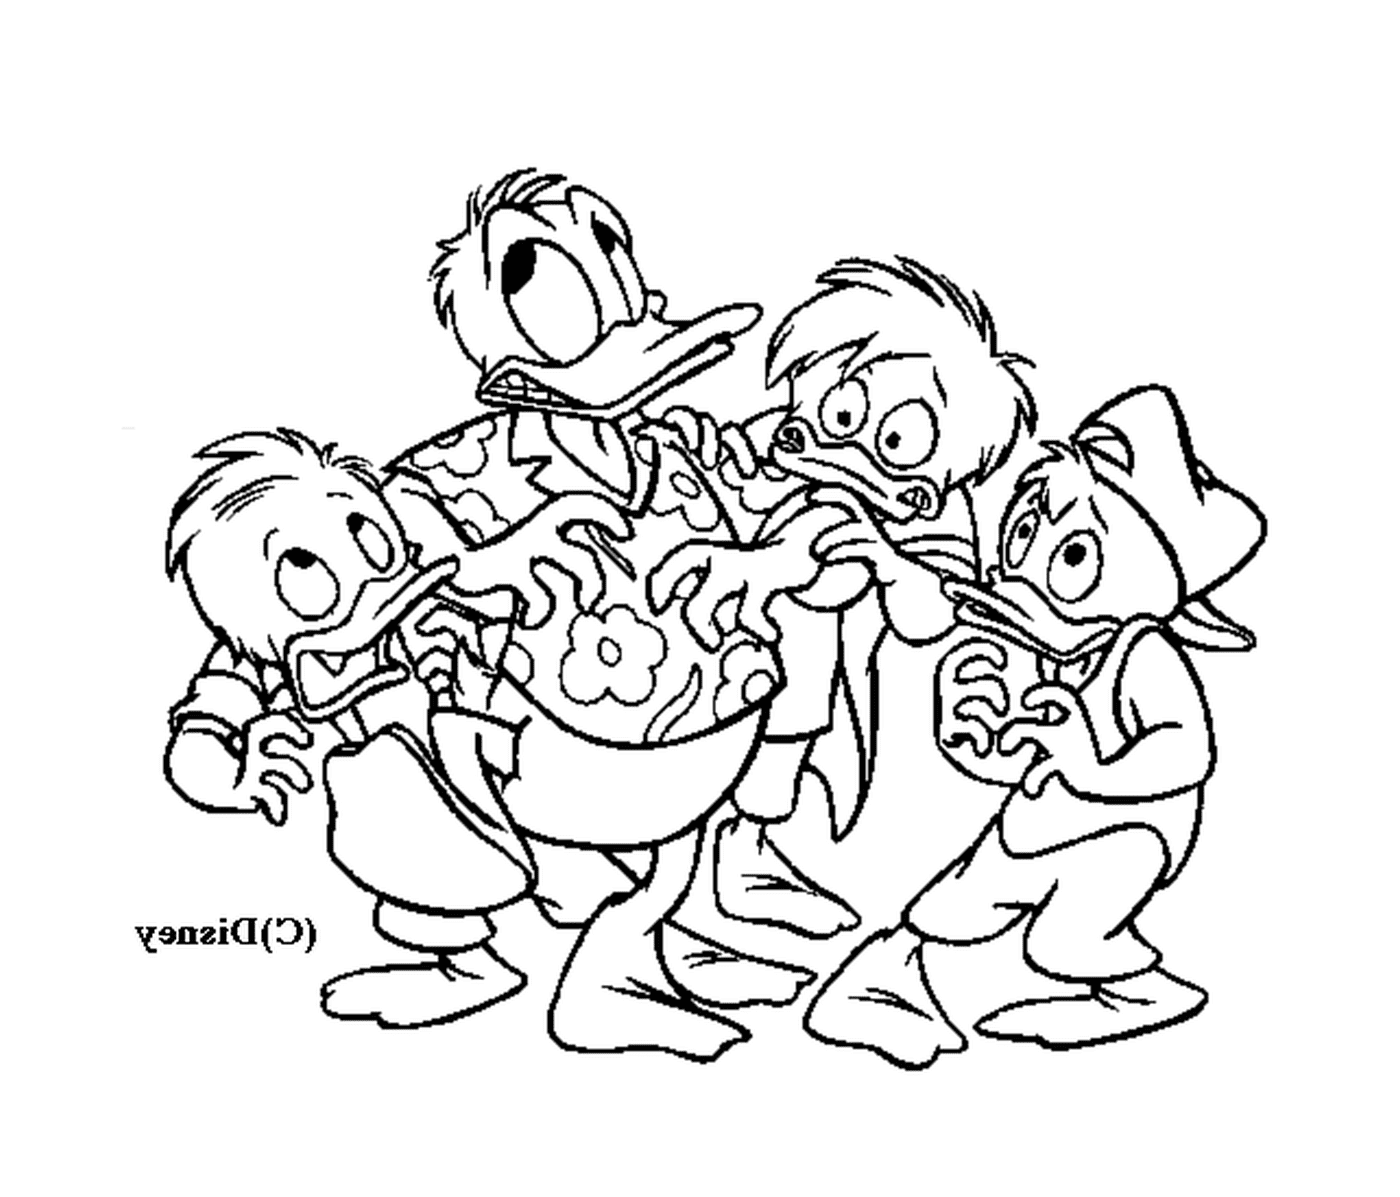  Donald shares a friendly moment with his nephews 